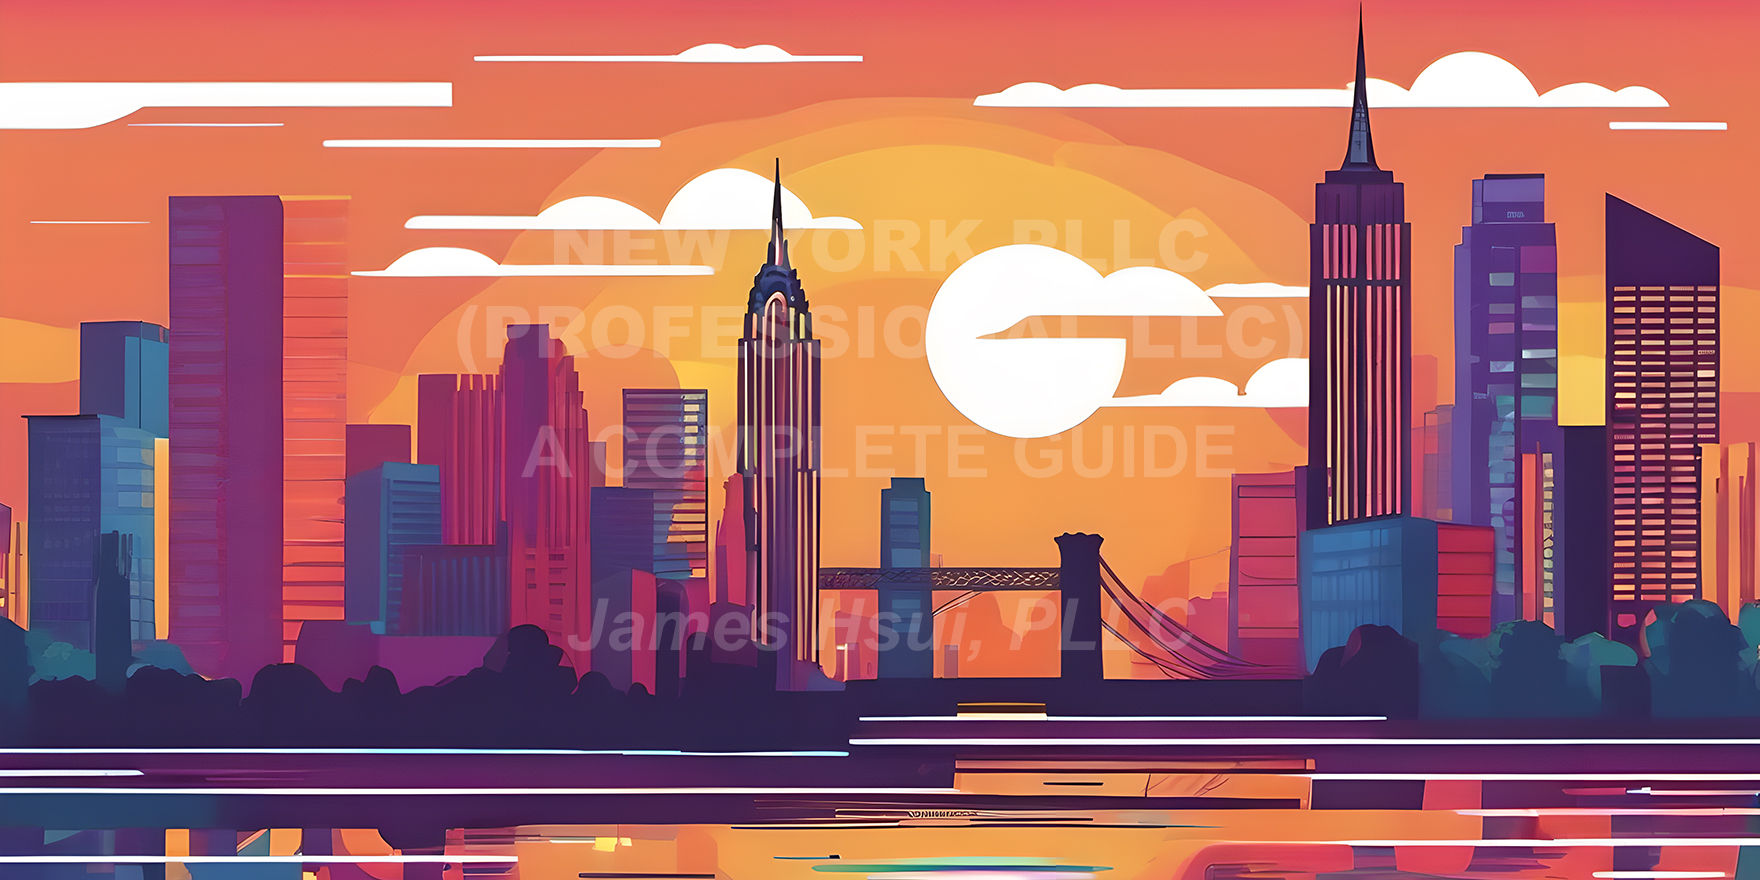 'New York PLLC (Professional LLC), A Complete Guide' superimposed on an image of a New York skyline with corporate buildings at sunset